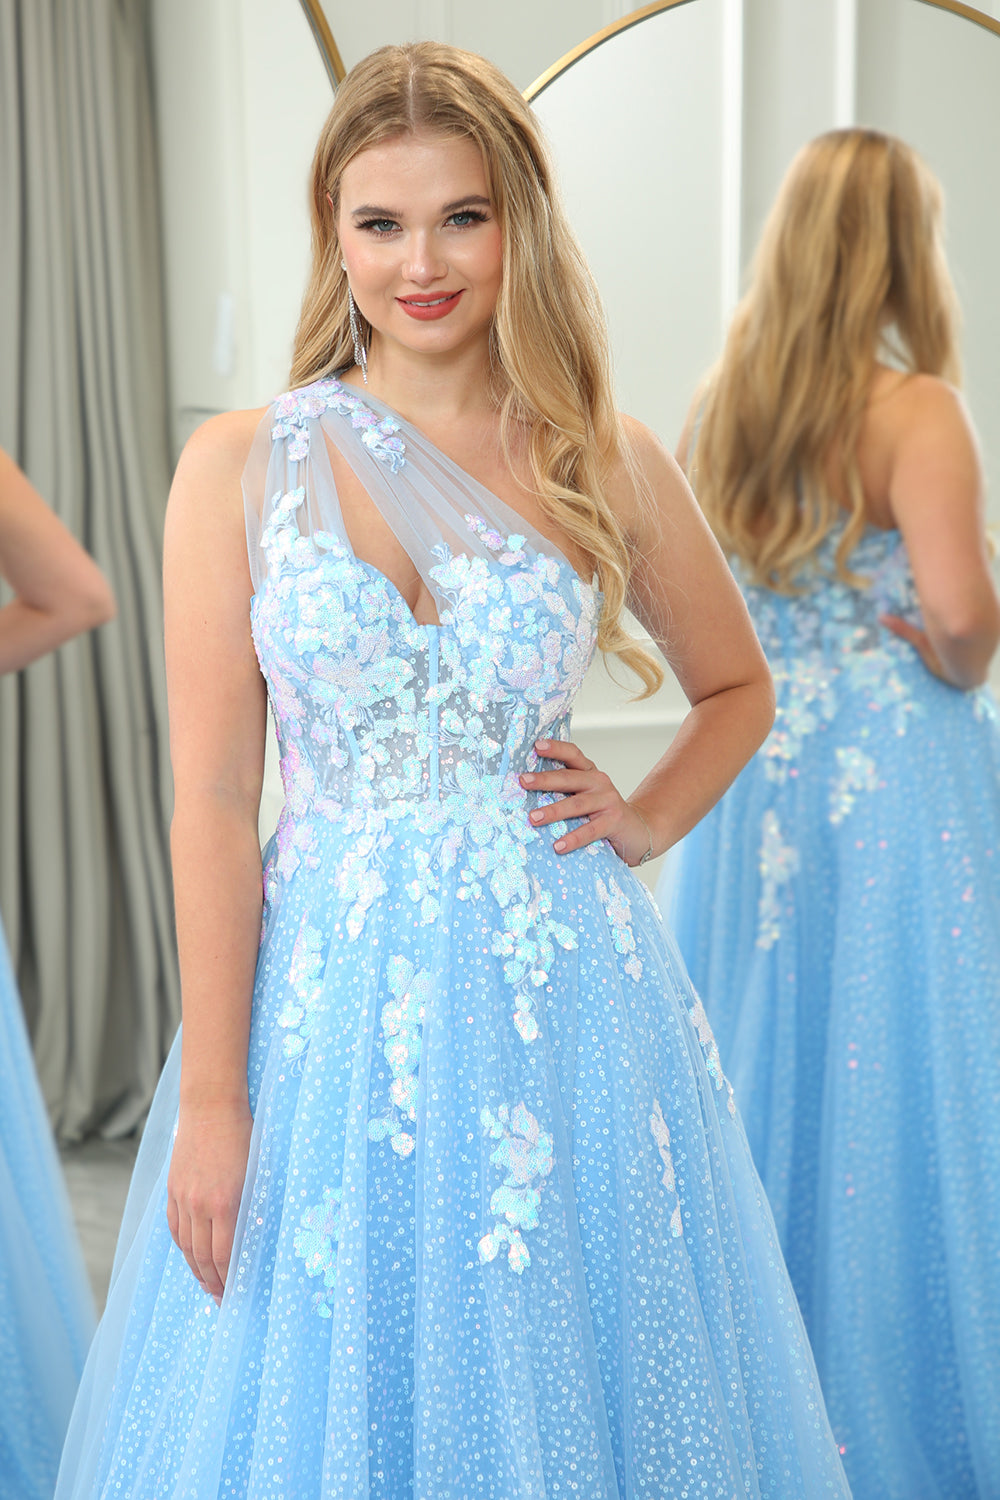 Light Blue A Line One Shoulder Sparkly Sequin Tulle Prom Dress With Appliques